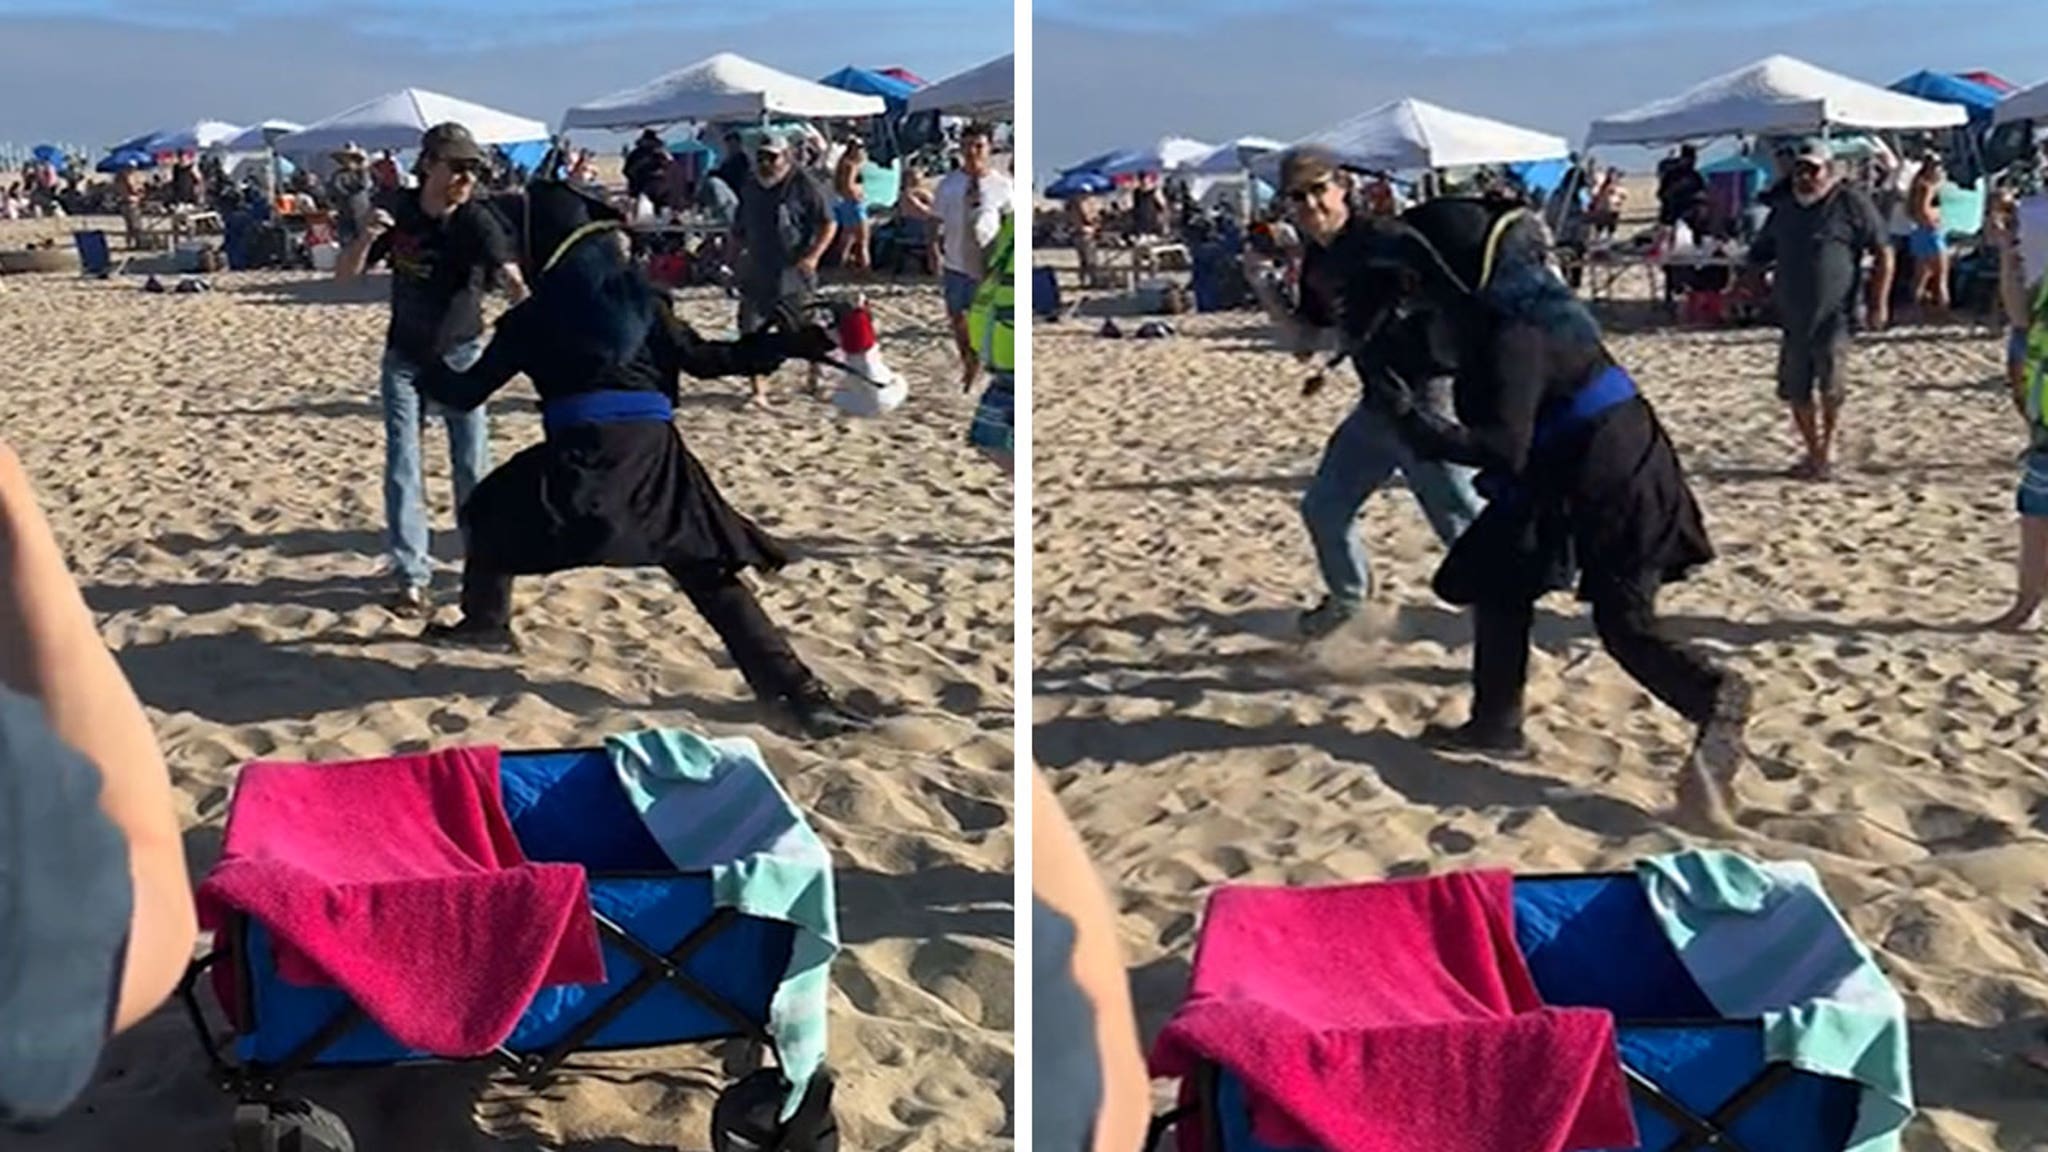 Man Attacked By Furry At Huntington Beach Meetup, Wild Video Shows image image